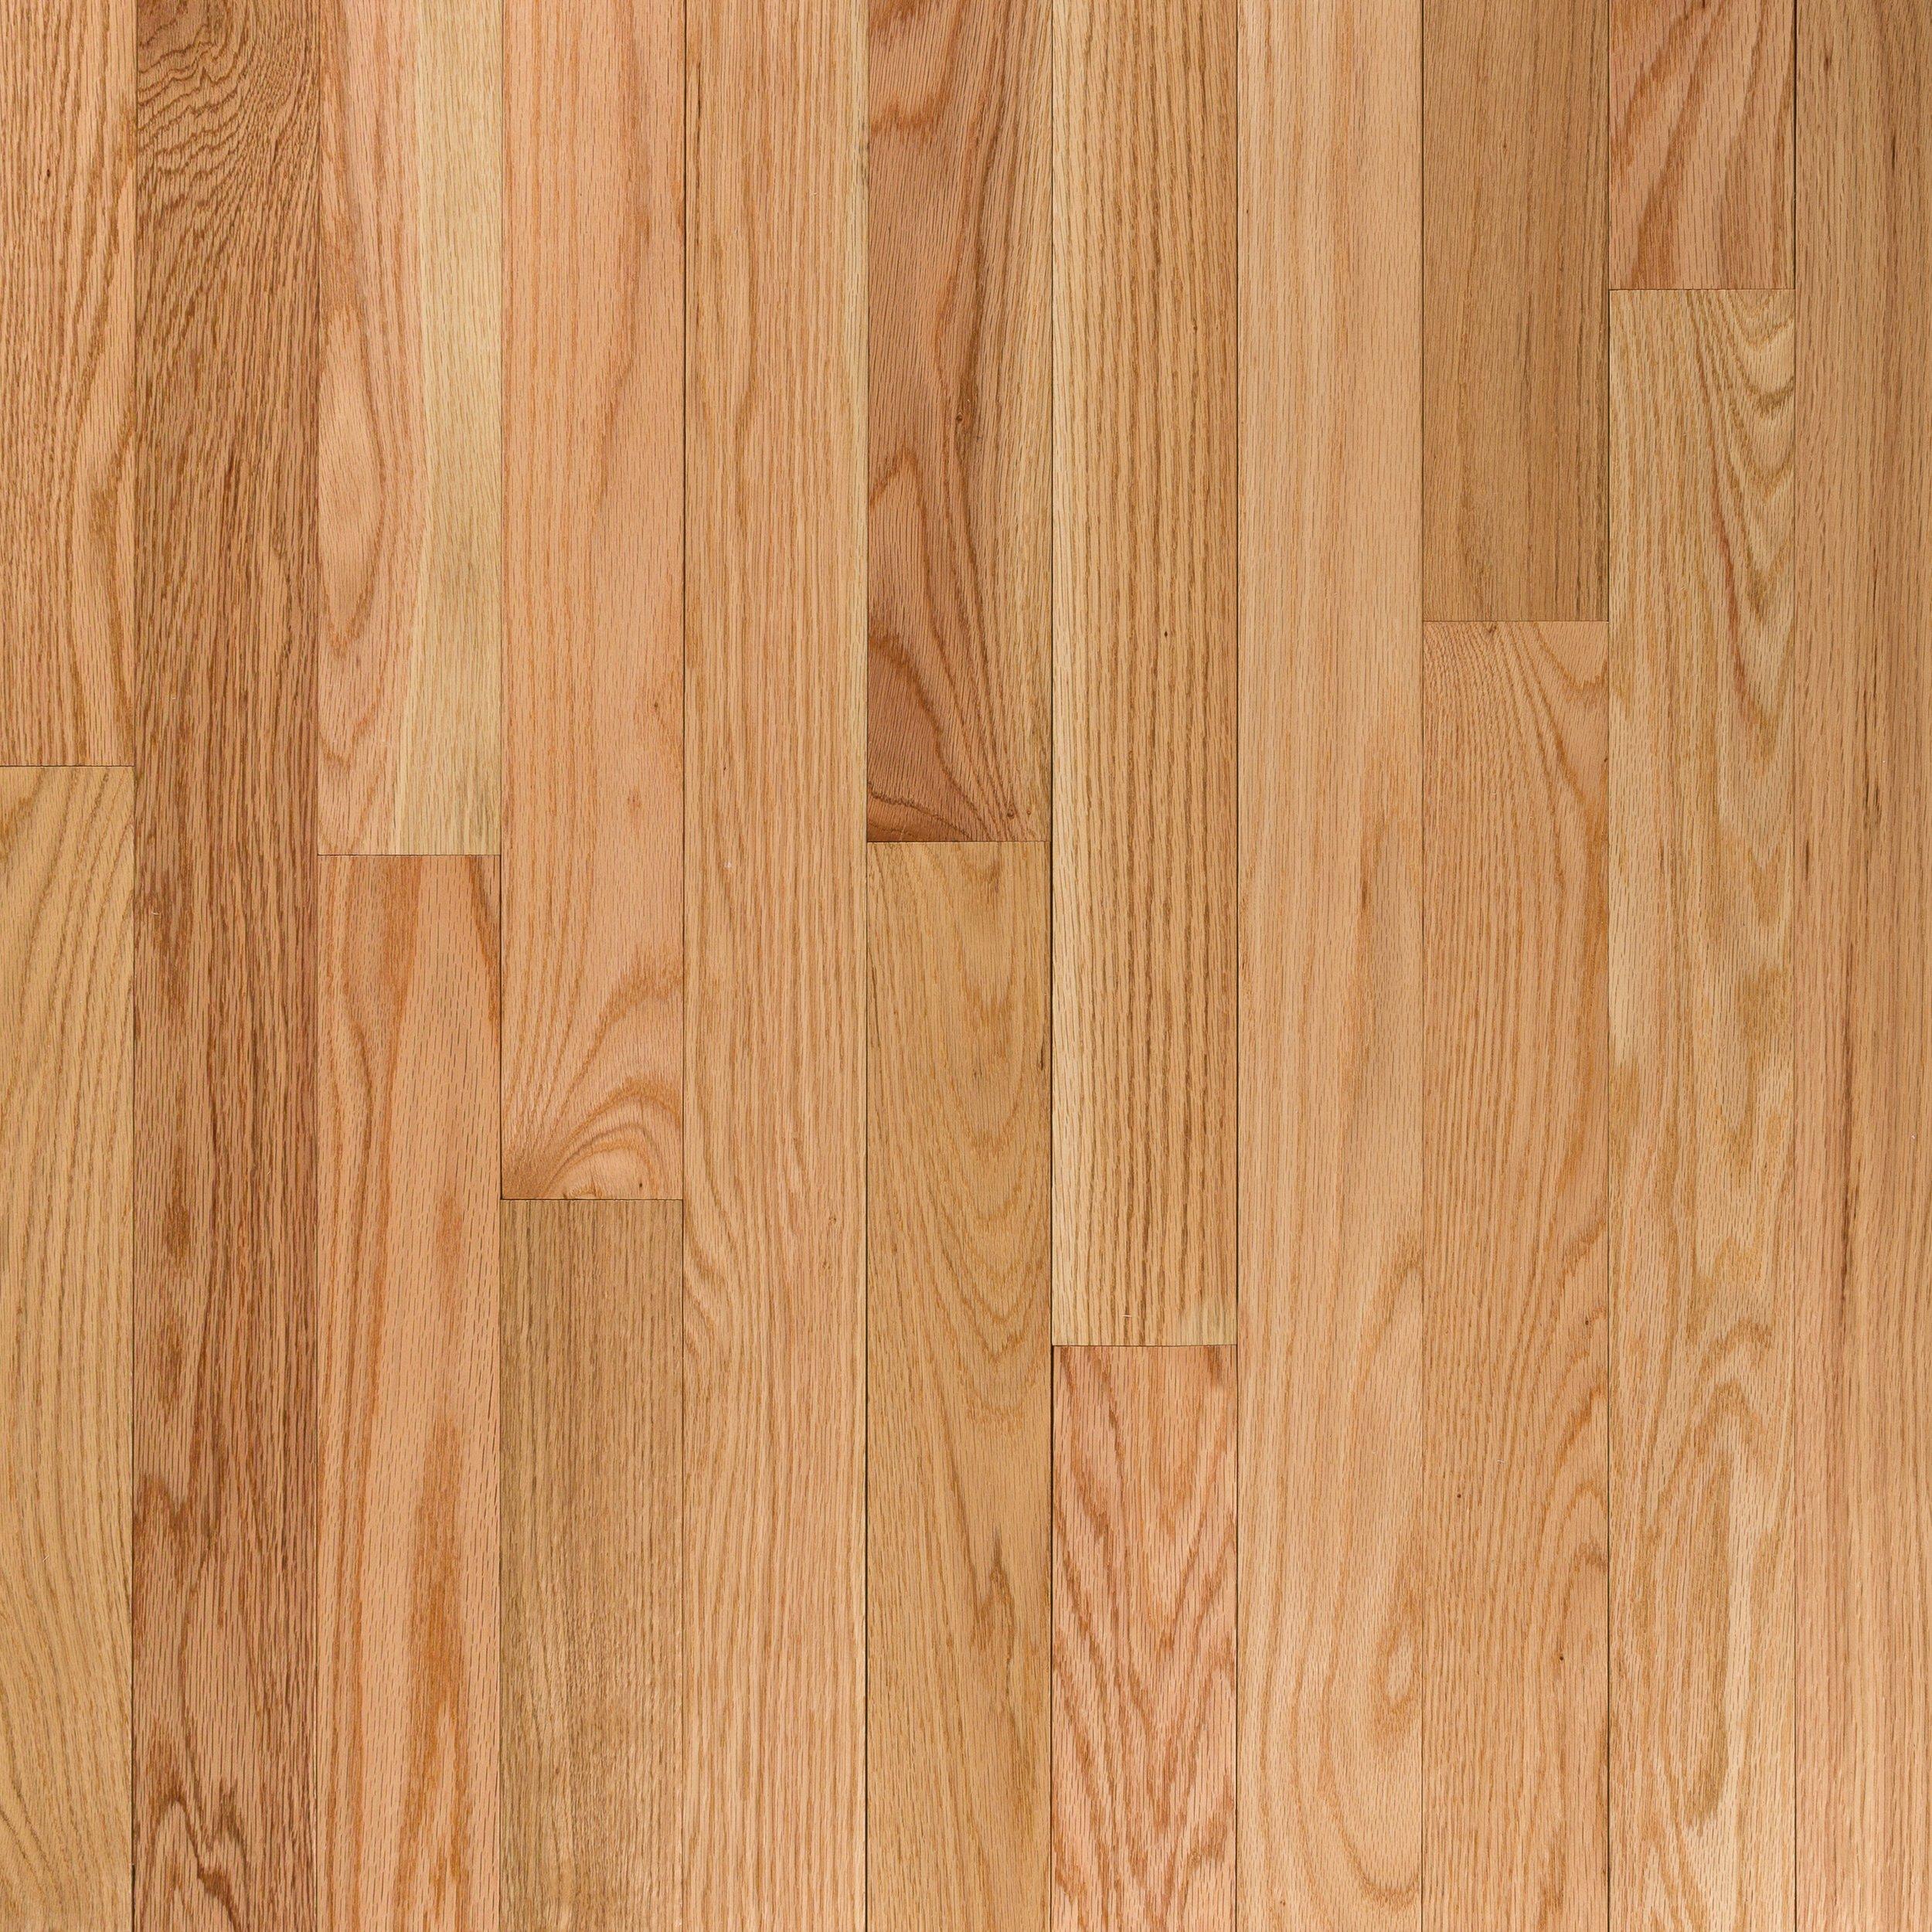 Natural Select Red Oak High Gloss Smooth Solid Hardwood